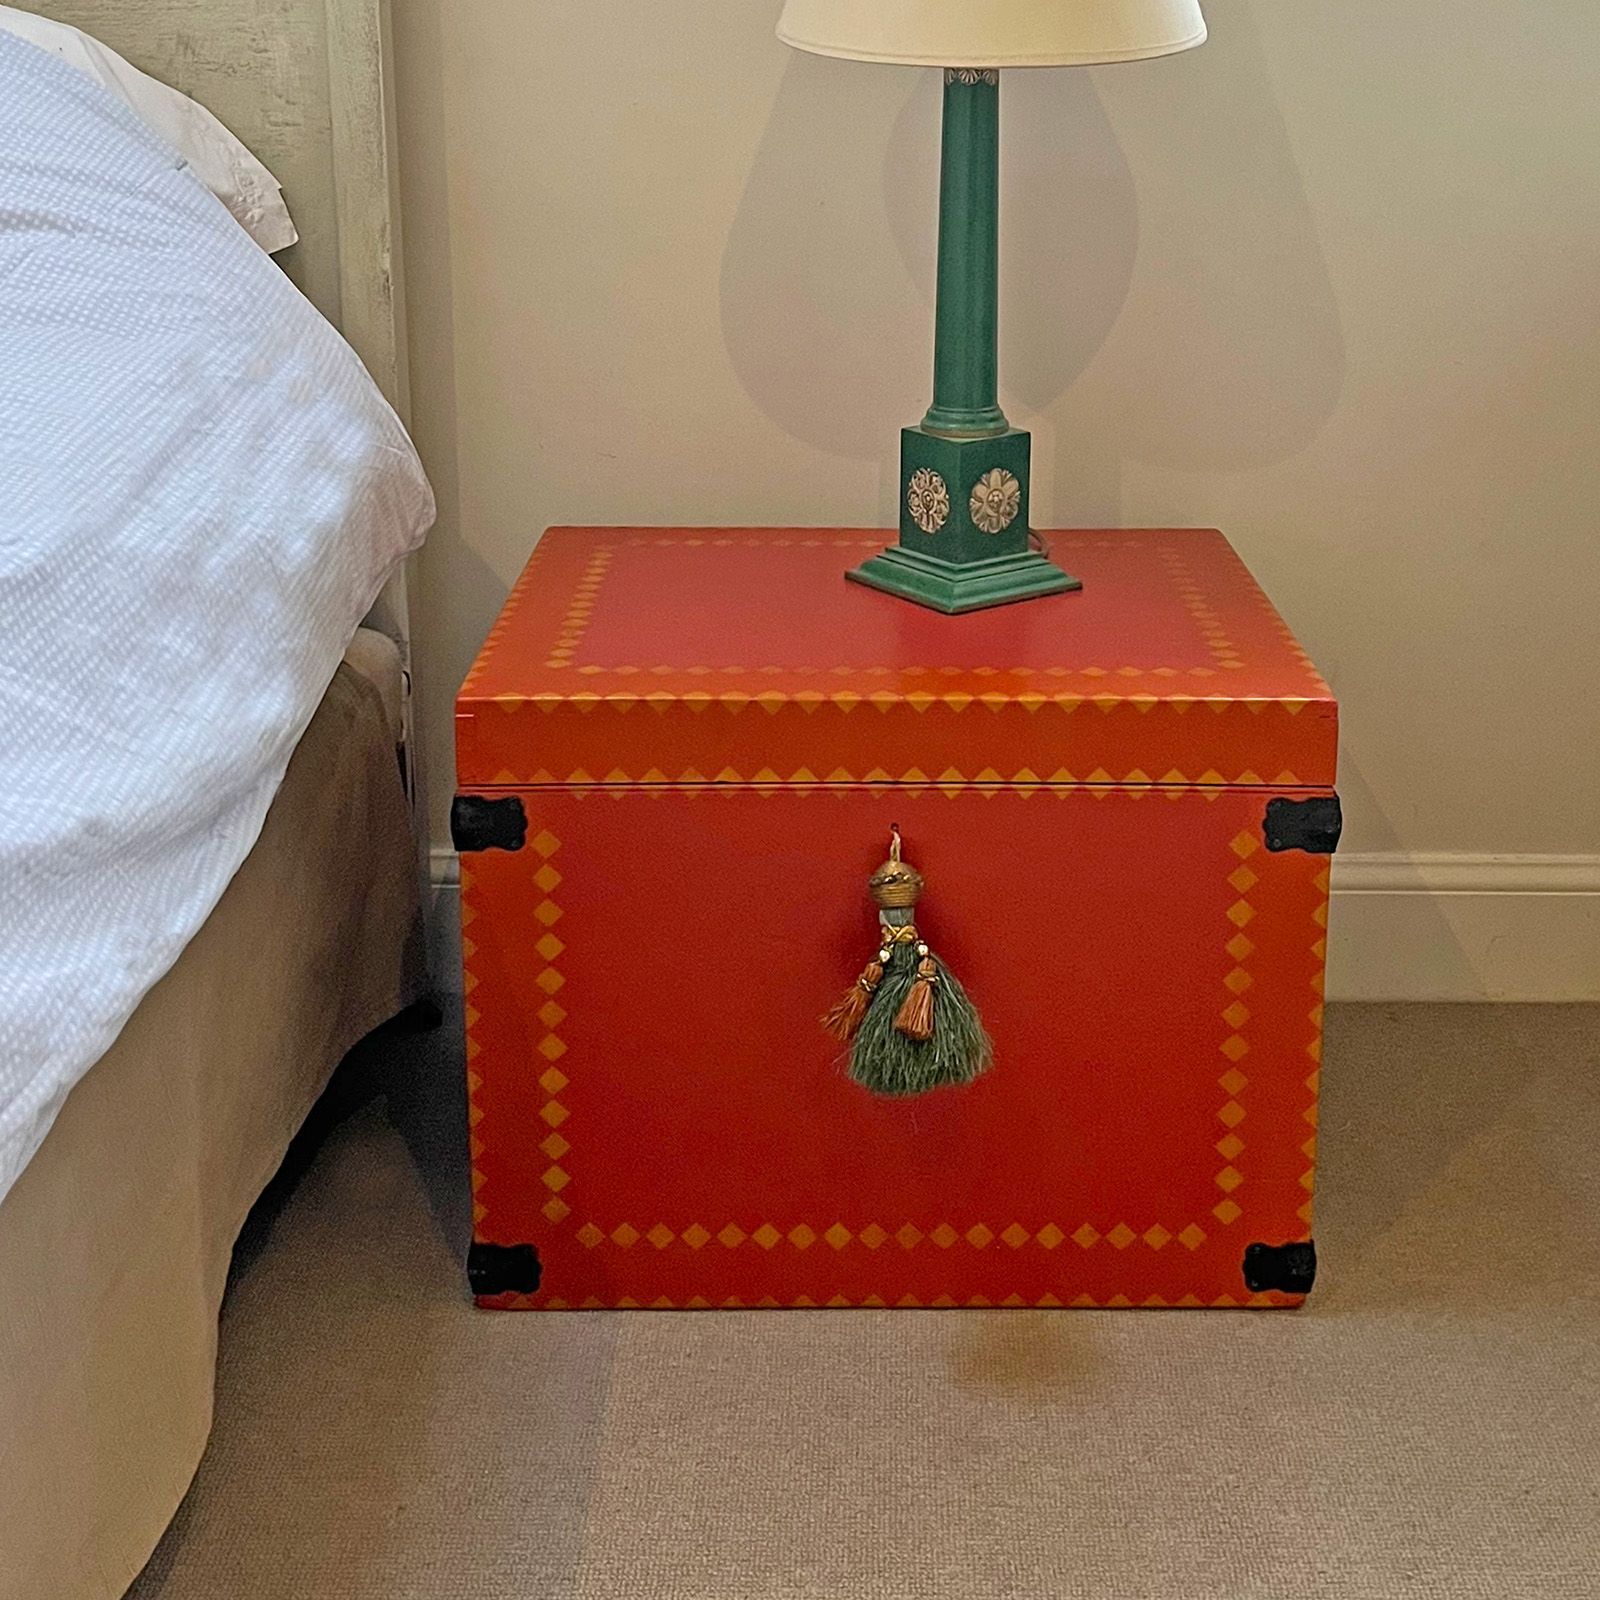 Our upcycled Carnival Chest pictured on site in the clients bedroom.